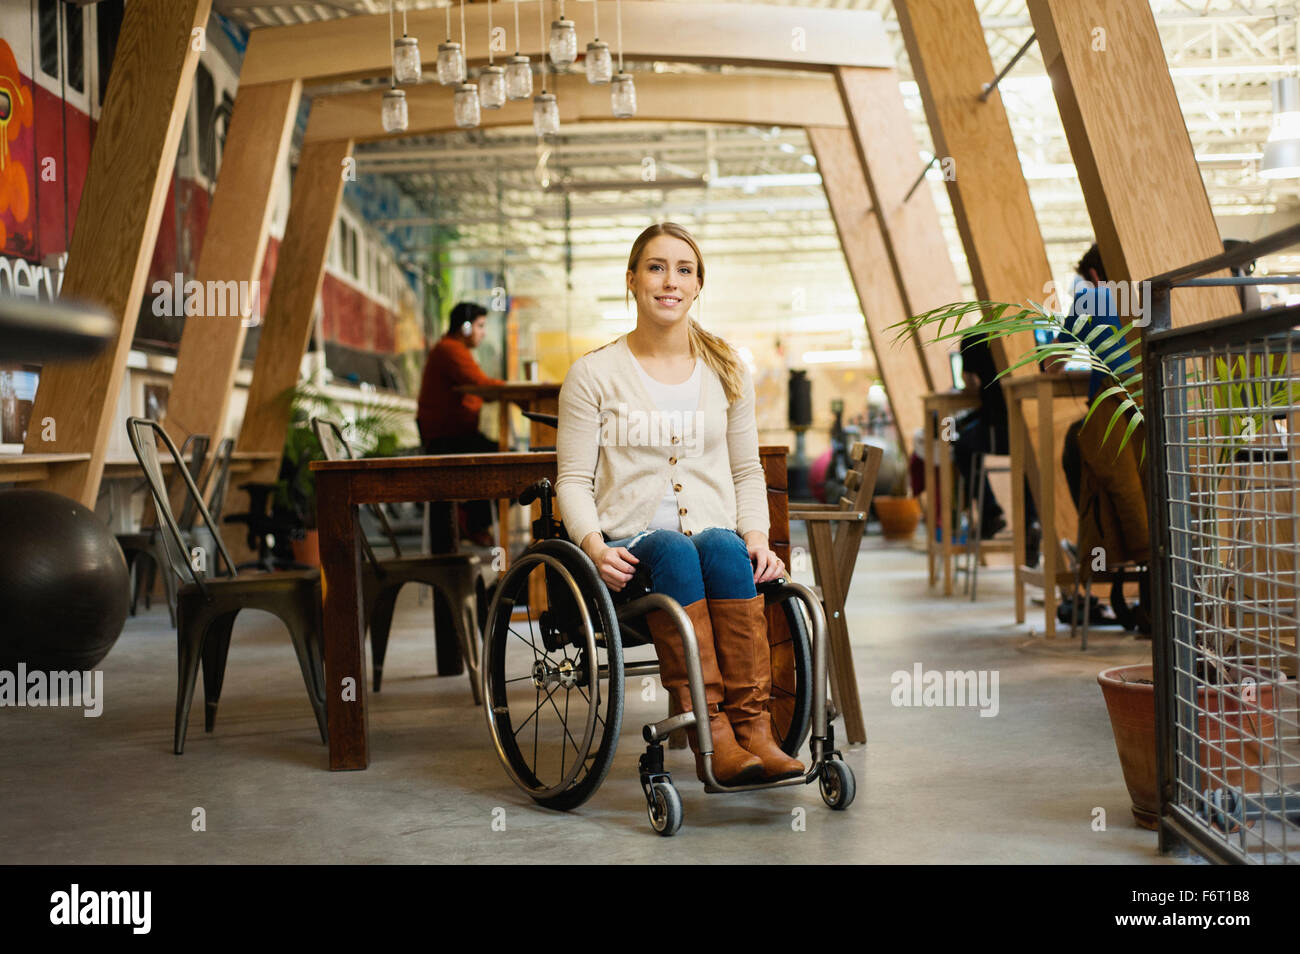 Paraplegic woman sitting in wheelchair in cafe Banque D'Images